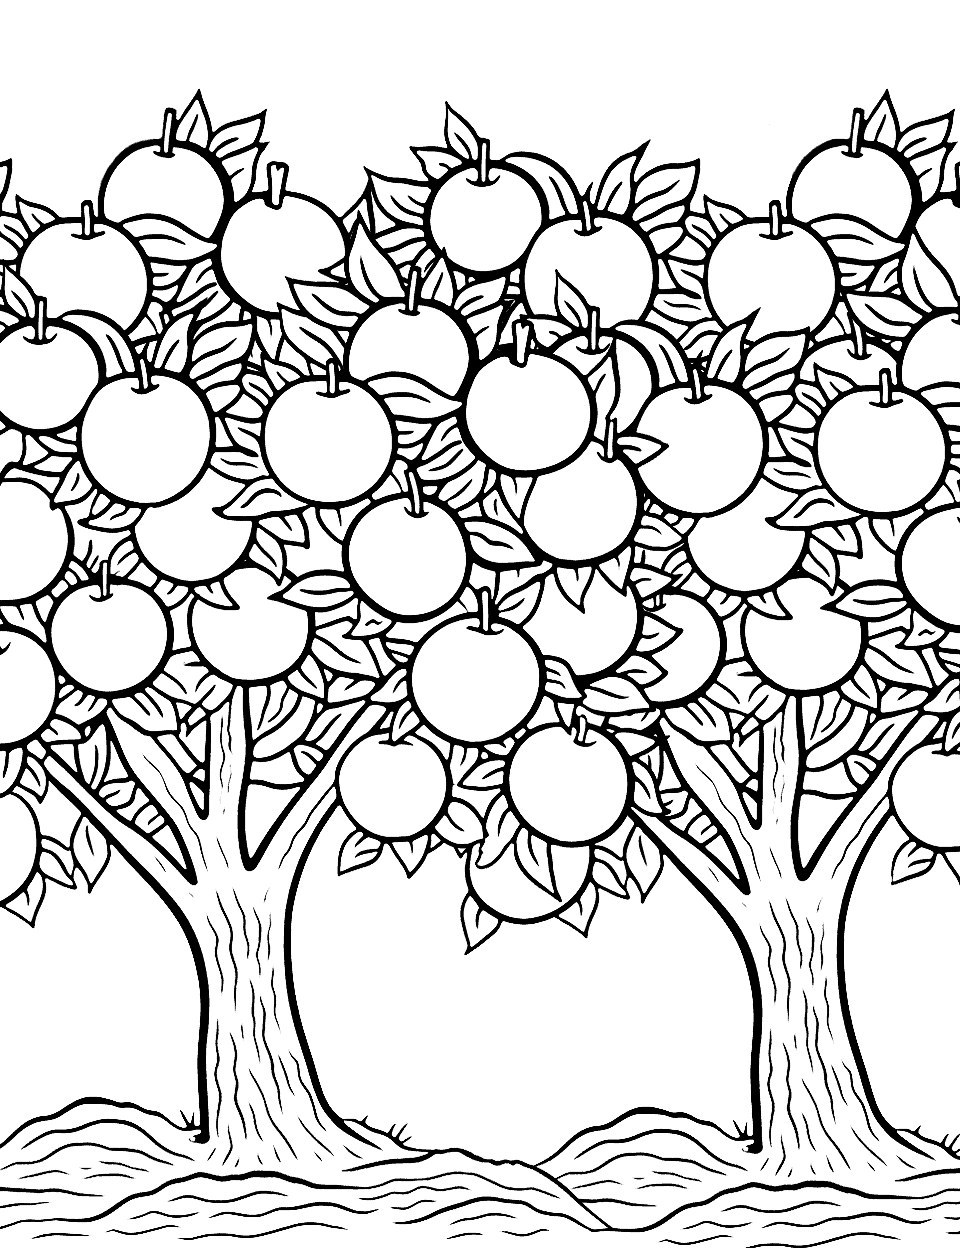 Apple Orchard Fruit Coloring Page - Apple trees with apples ready for picking.